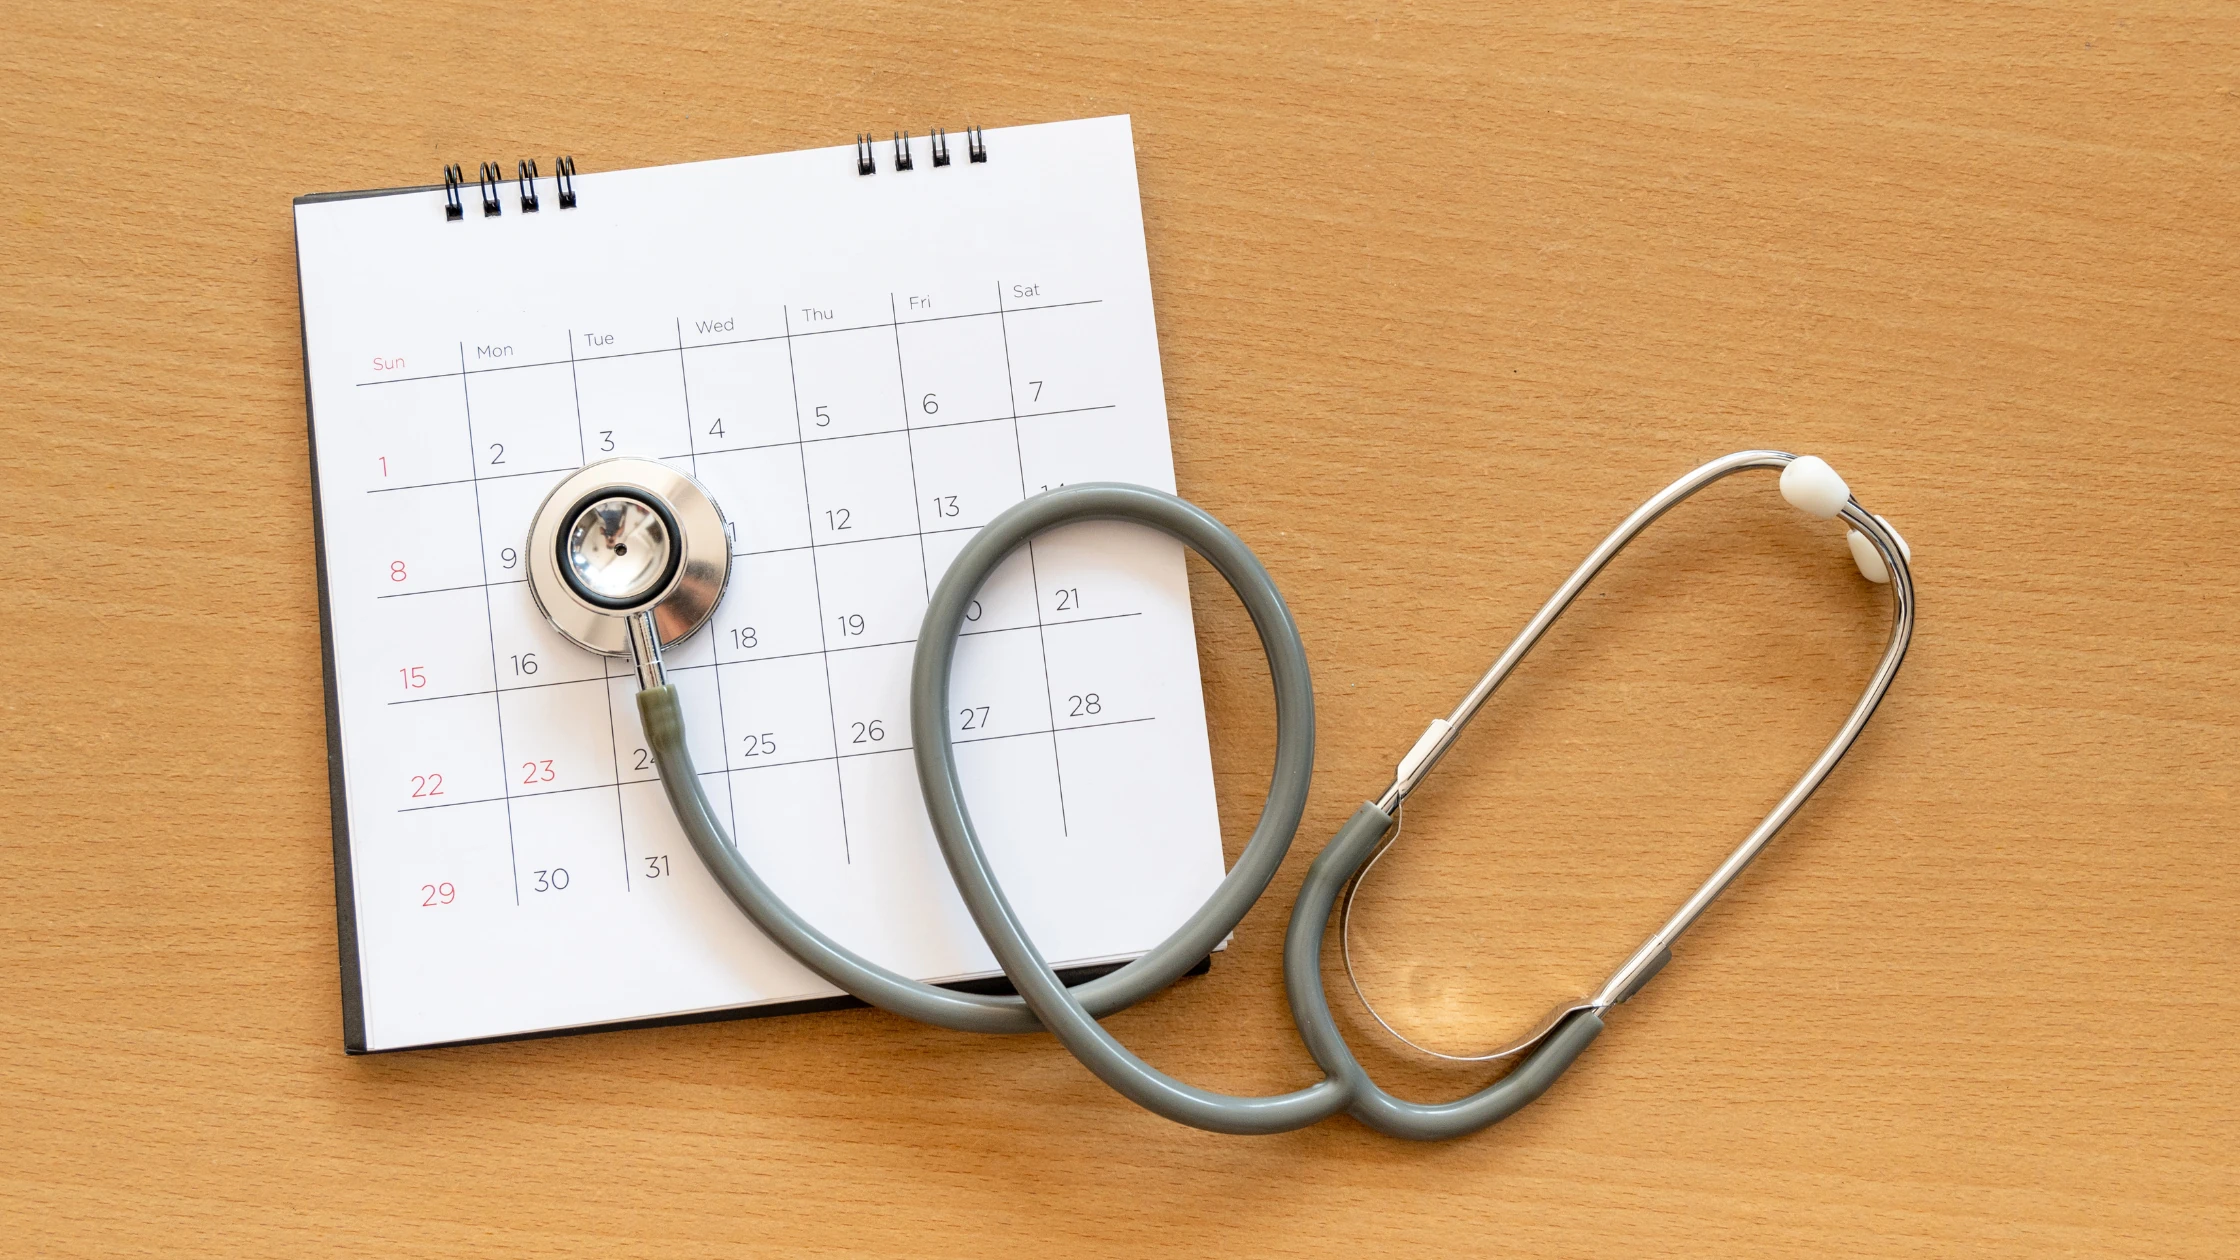 A calendar with a stethoscope sitting on top of it signifying the study routine of a medical school student.